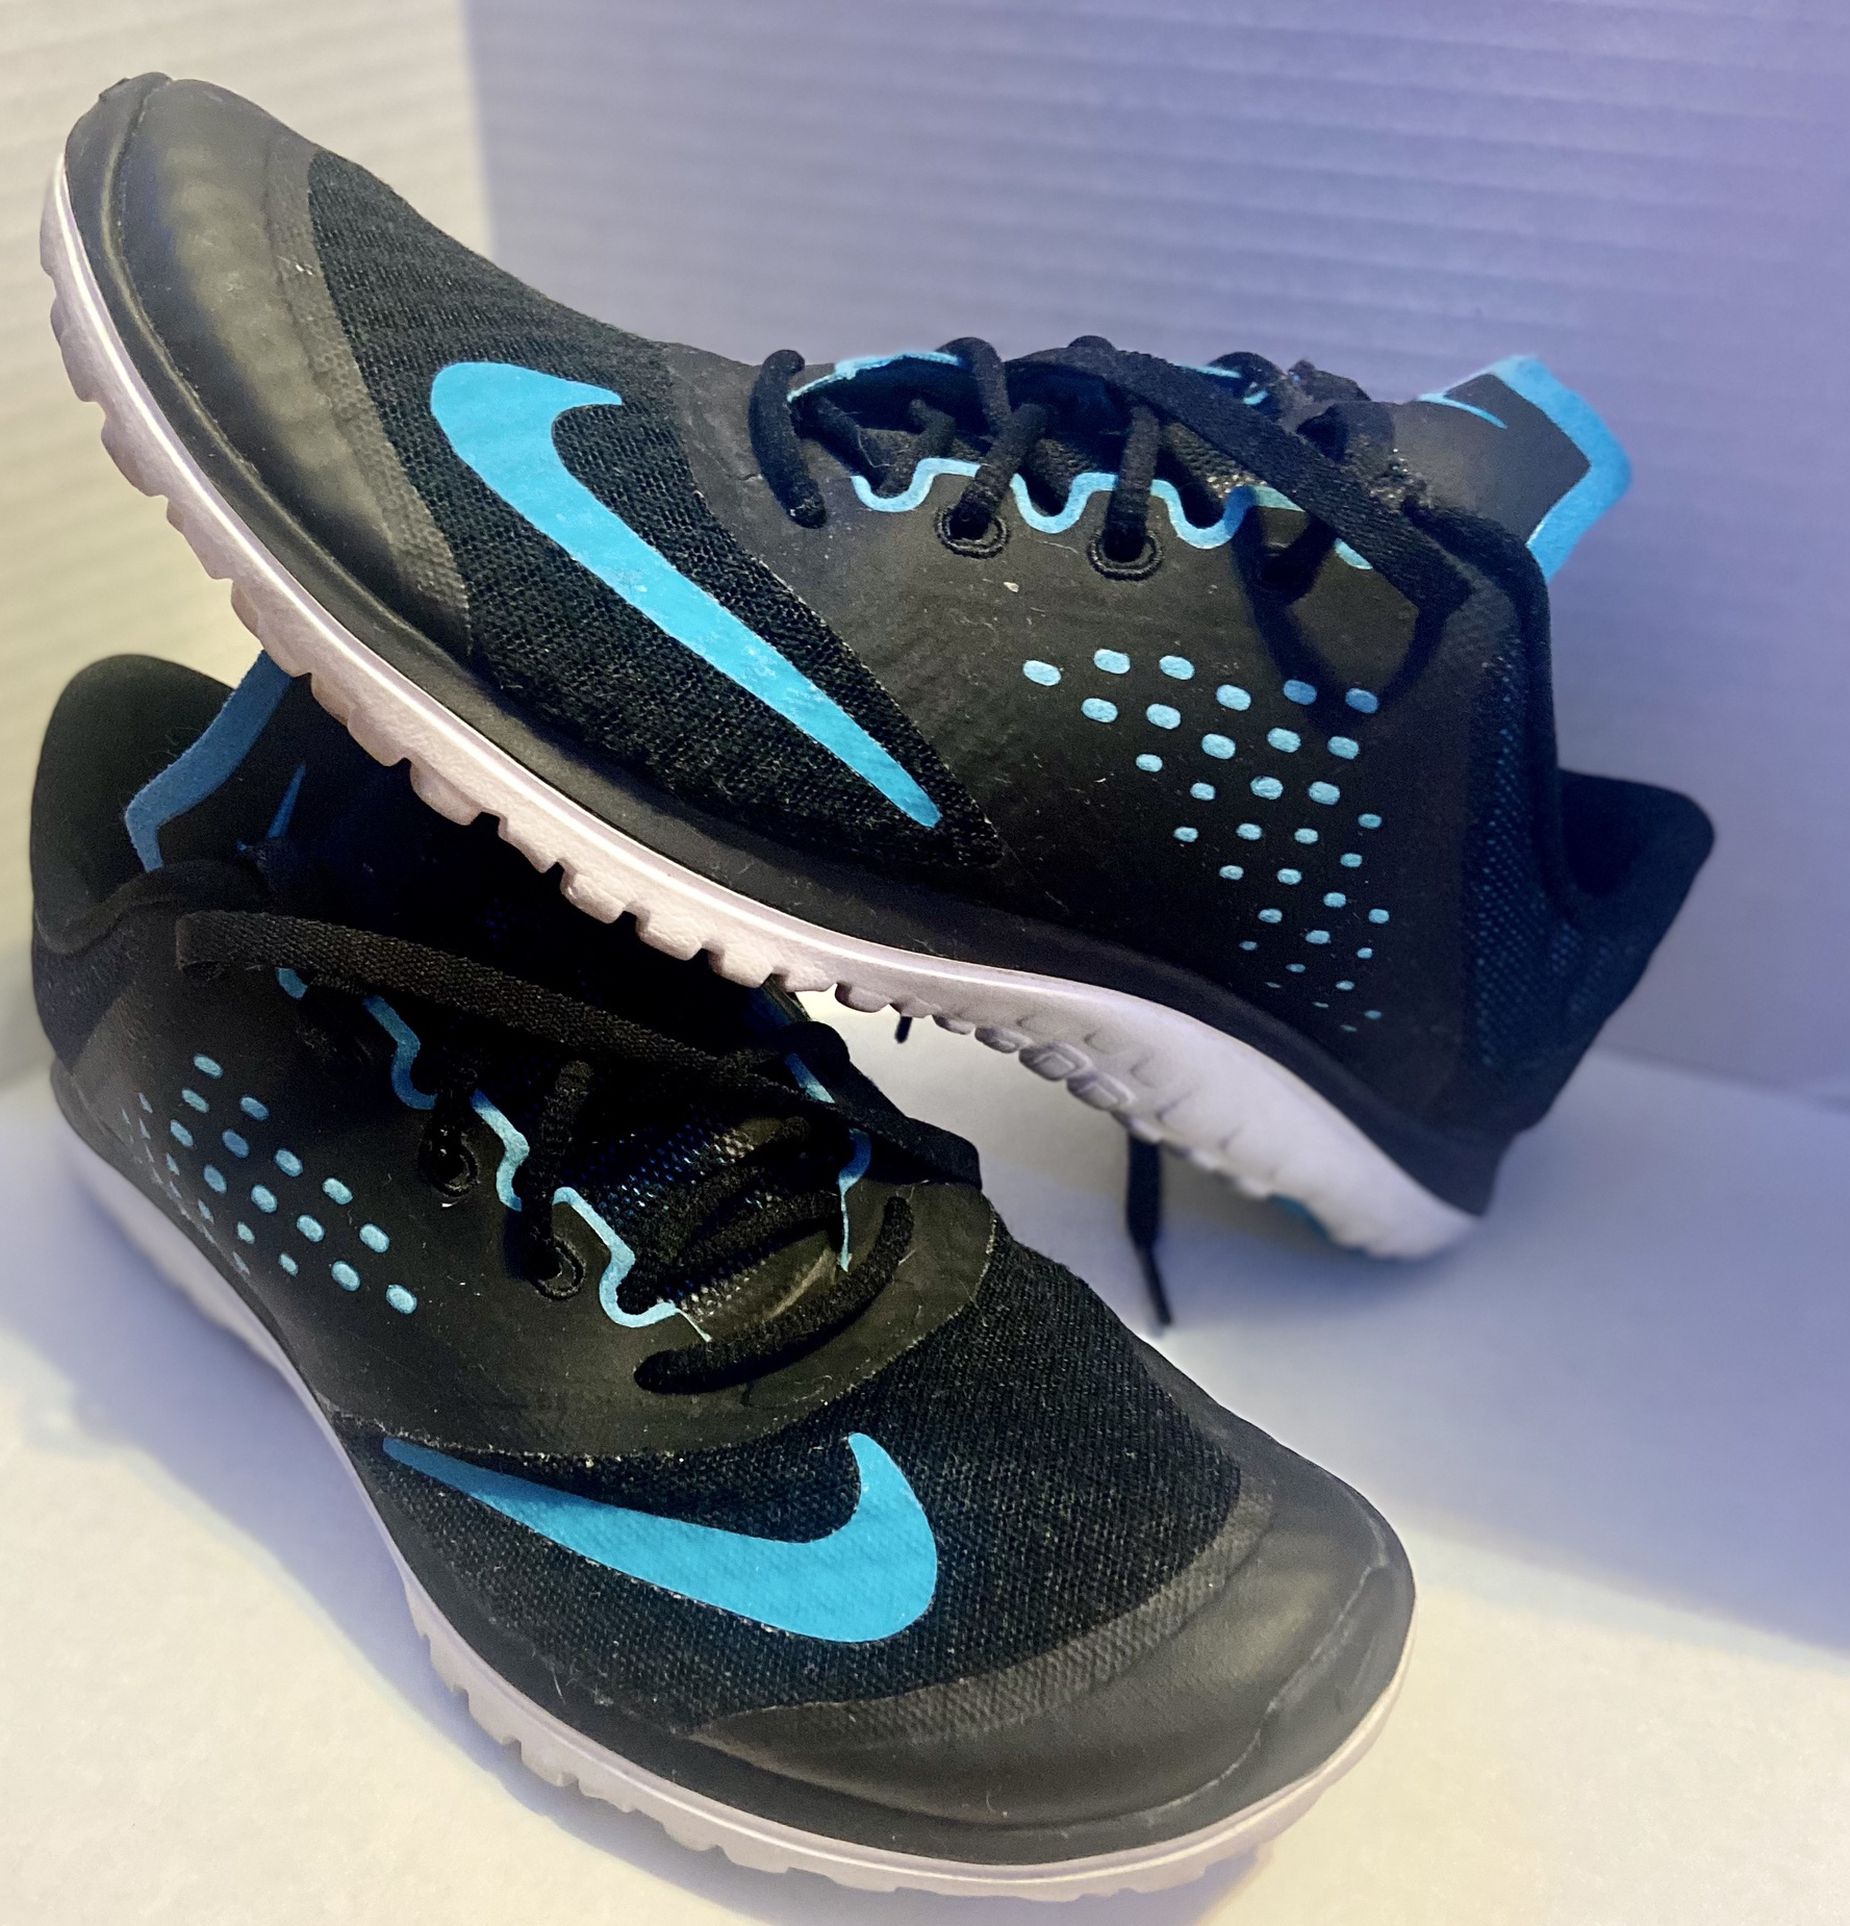 Like New NIKE running Shoe 7.5 Women’s $35 Free Gift Wrap Available Per Request For VDAY